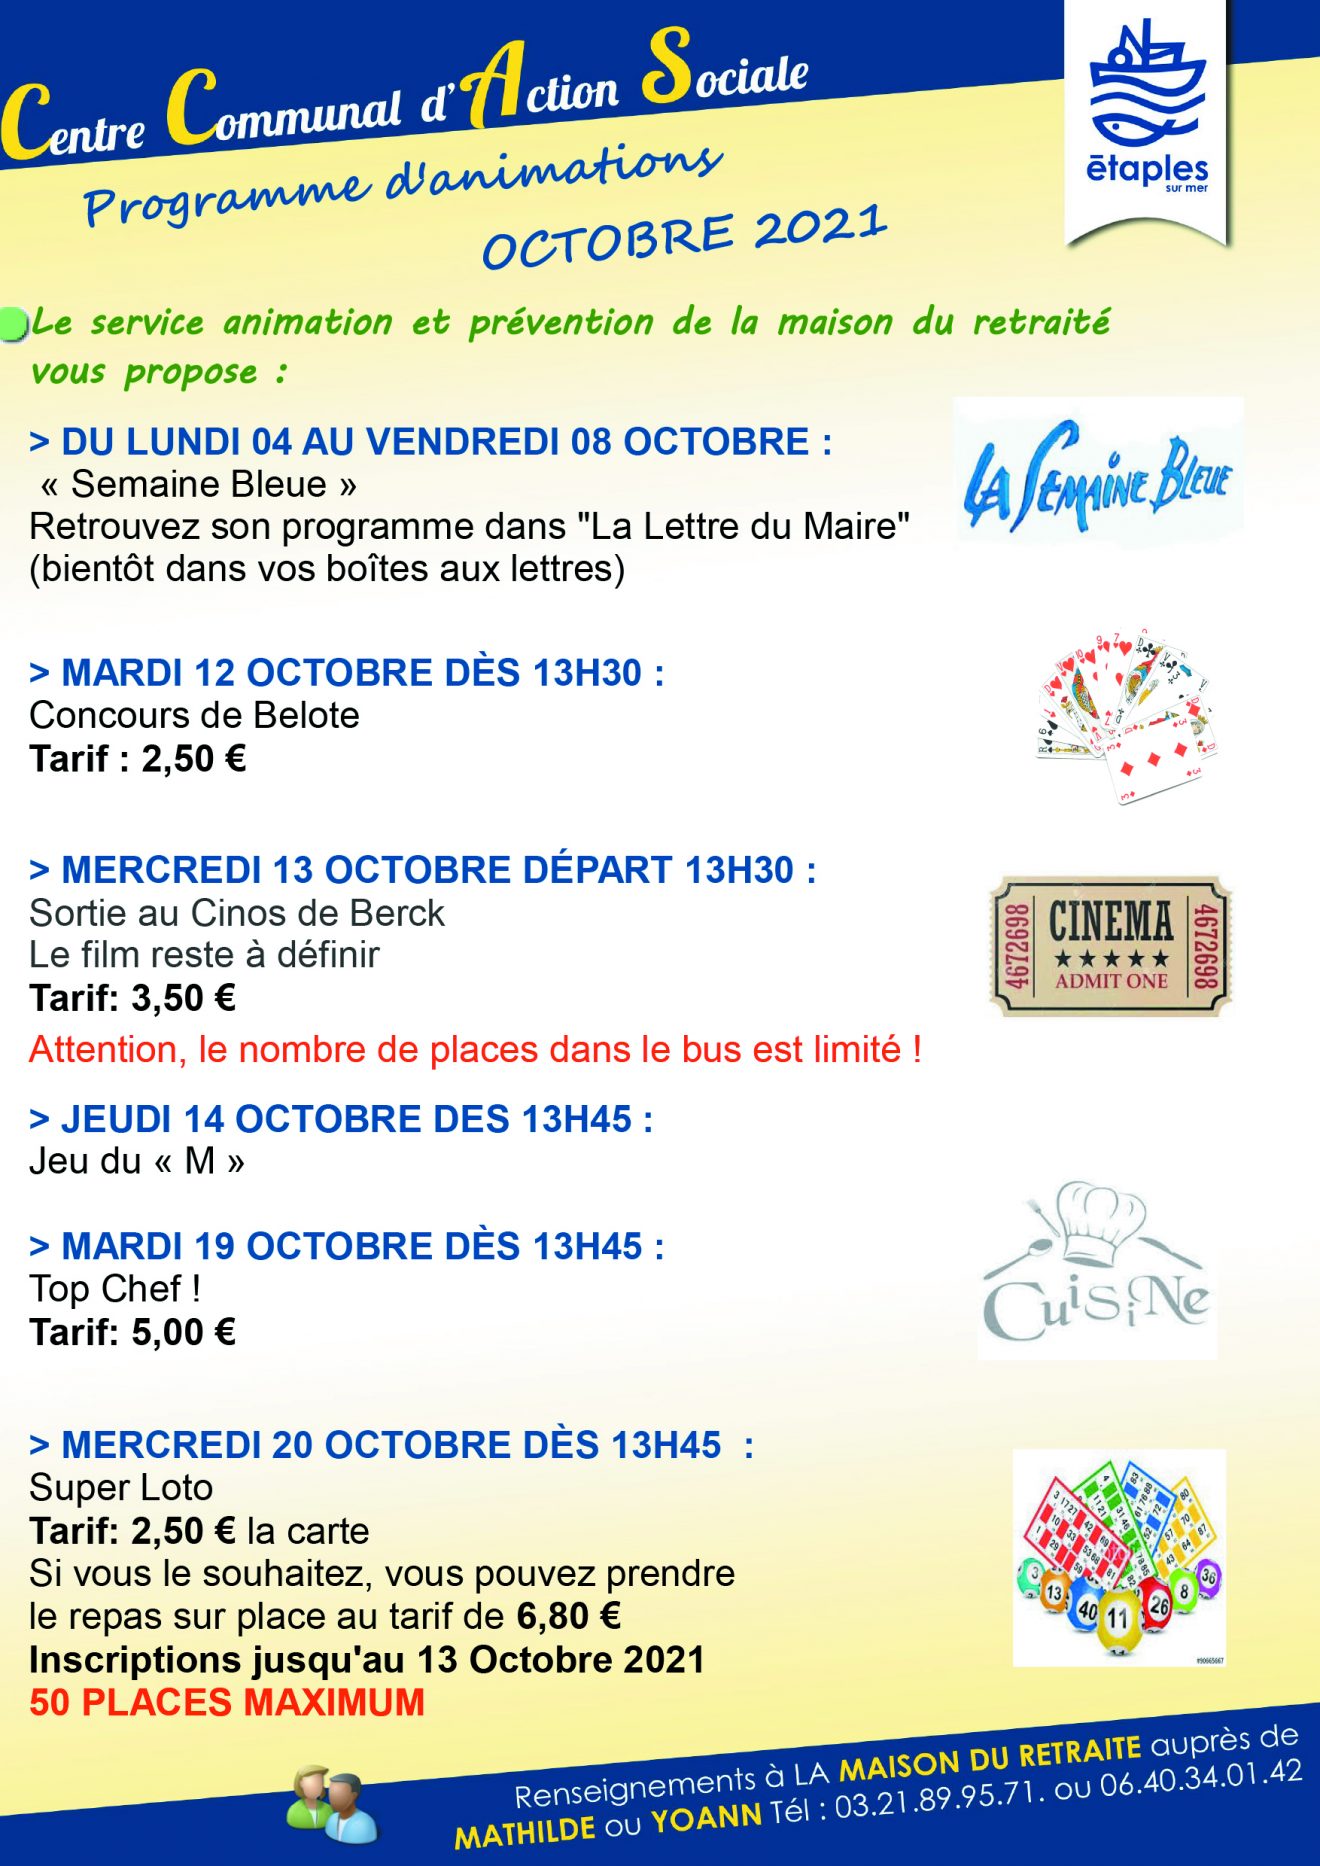 PROGRAMME D'ANIMATIONS